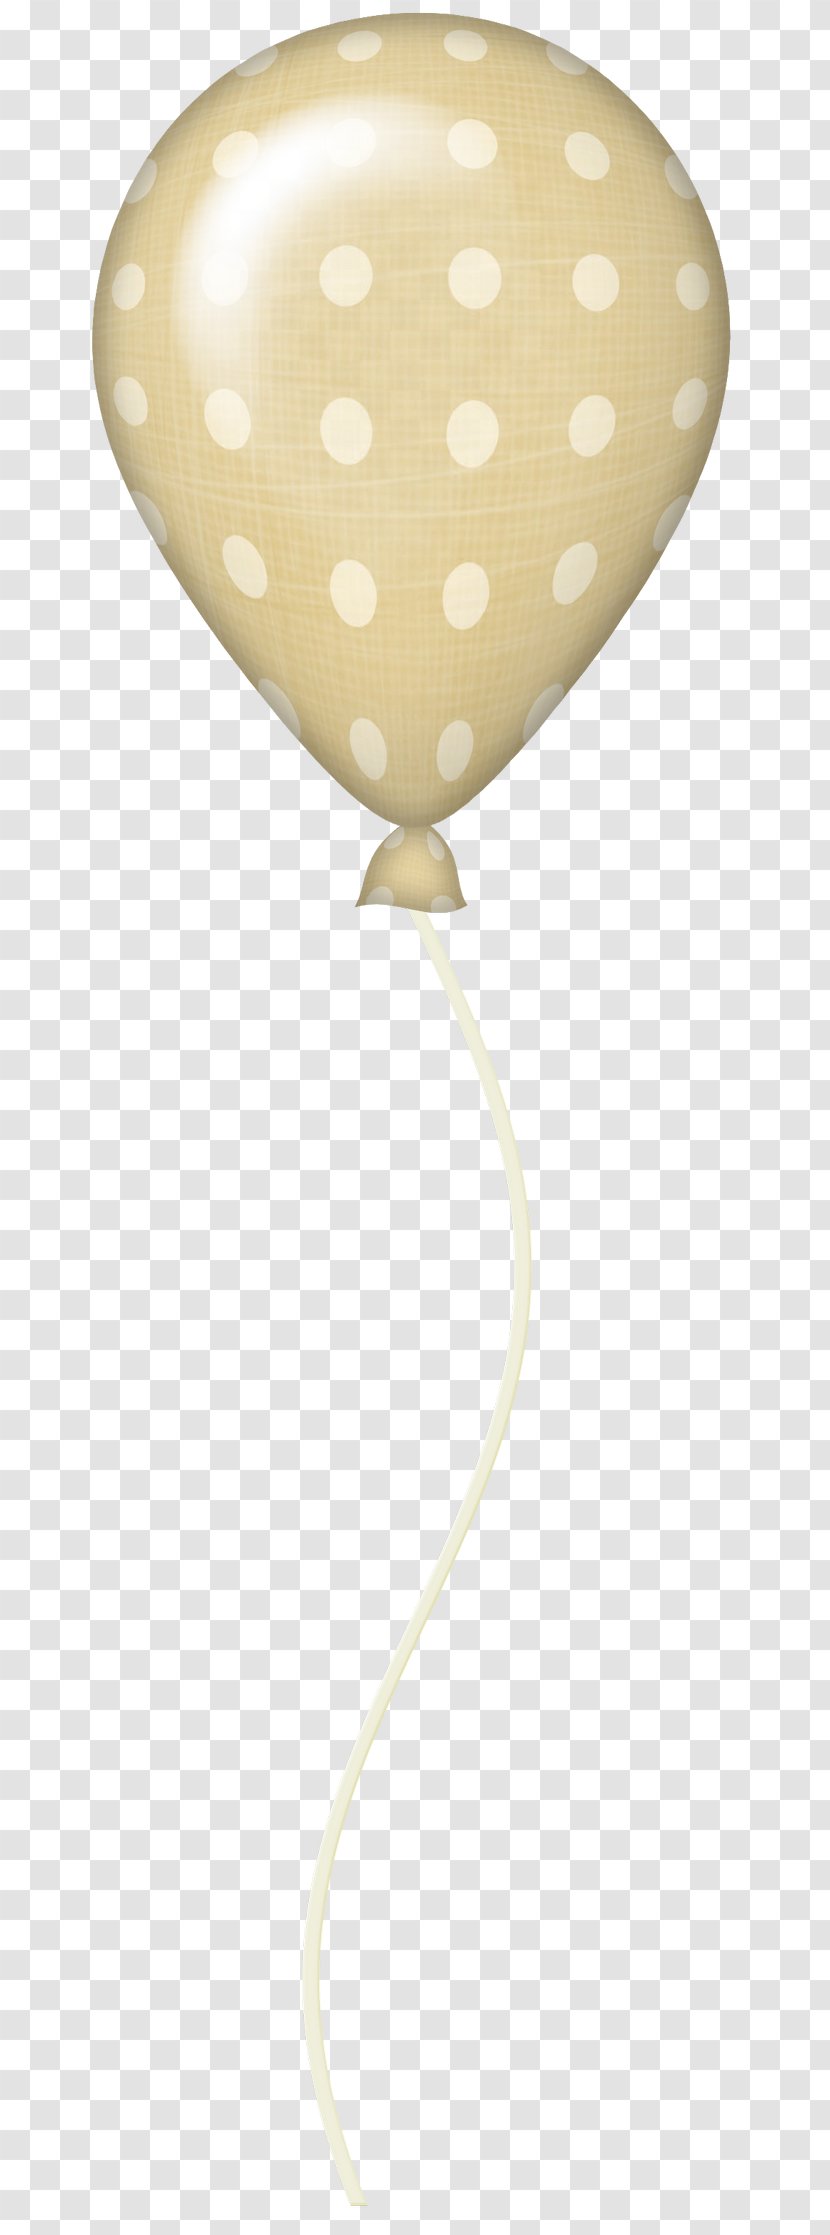 Balloon Birthday Party Clip Art - Lighting Transparent PNG